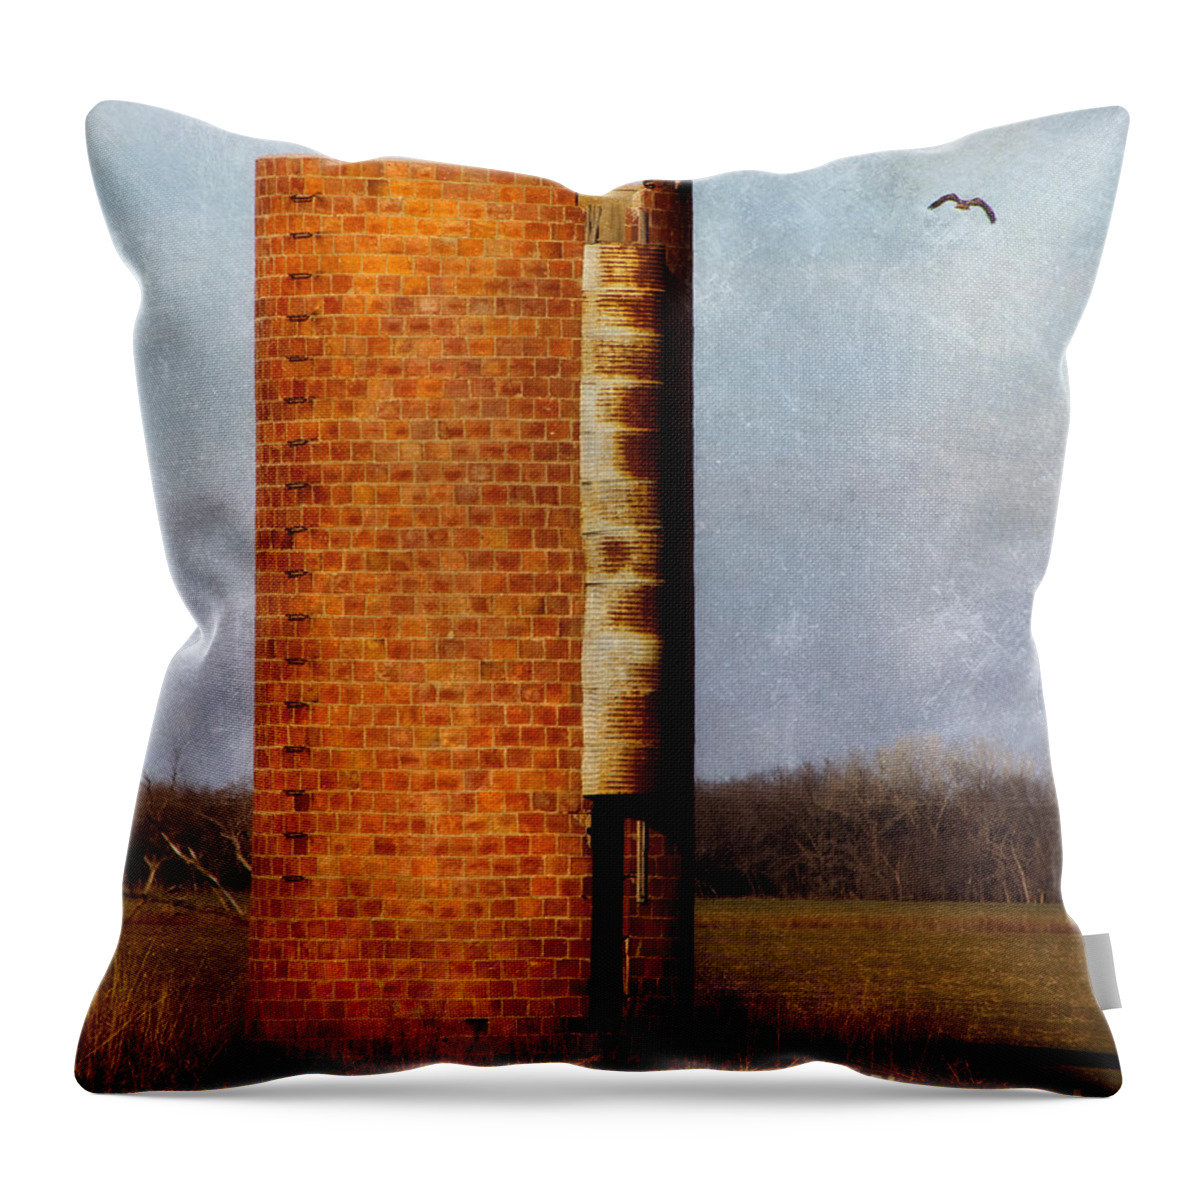 Abandoned Throw Pillow featuring the photograph Silo by Lana Trussell